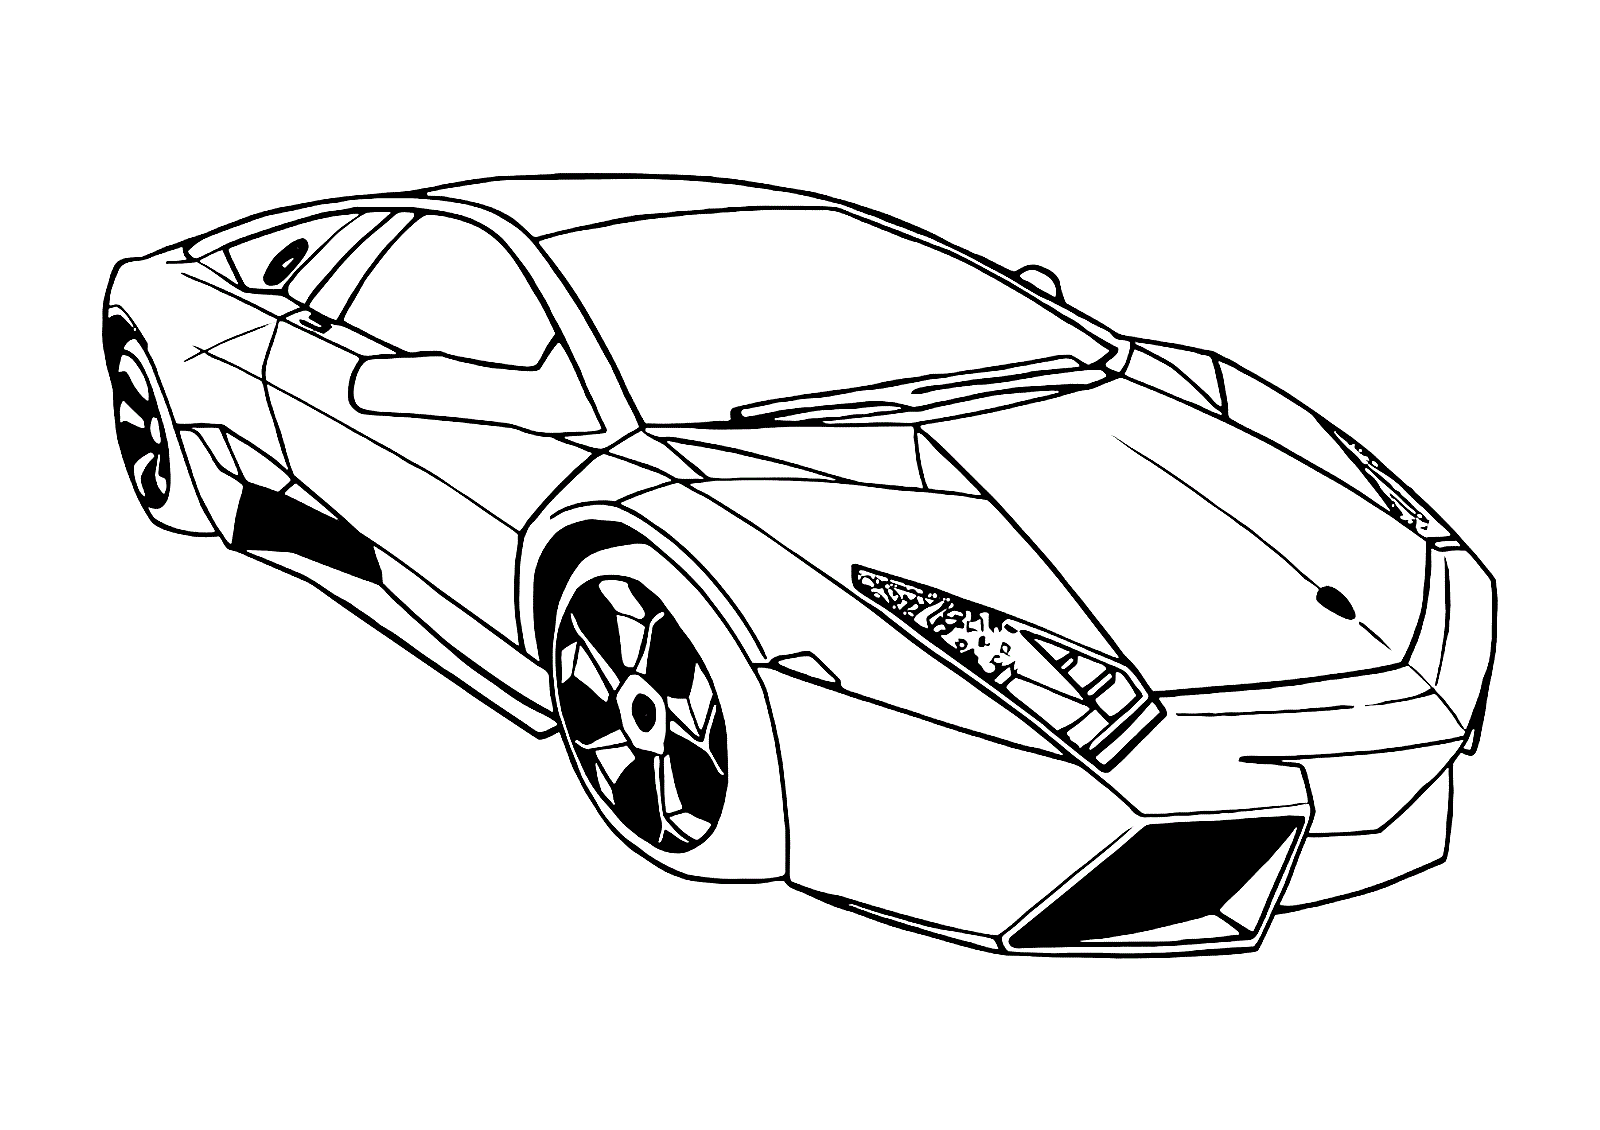 . ClipartLook.com how to find free lamborghini trend lamborghini coloring pages to print  ClipartLook.com 